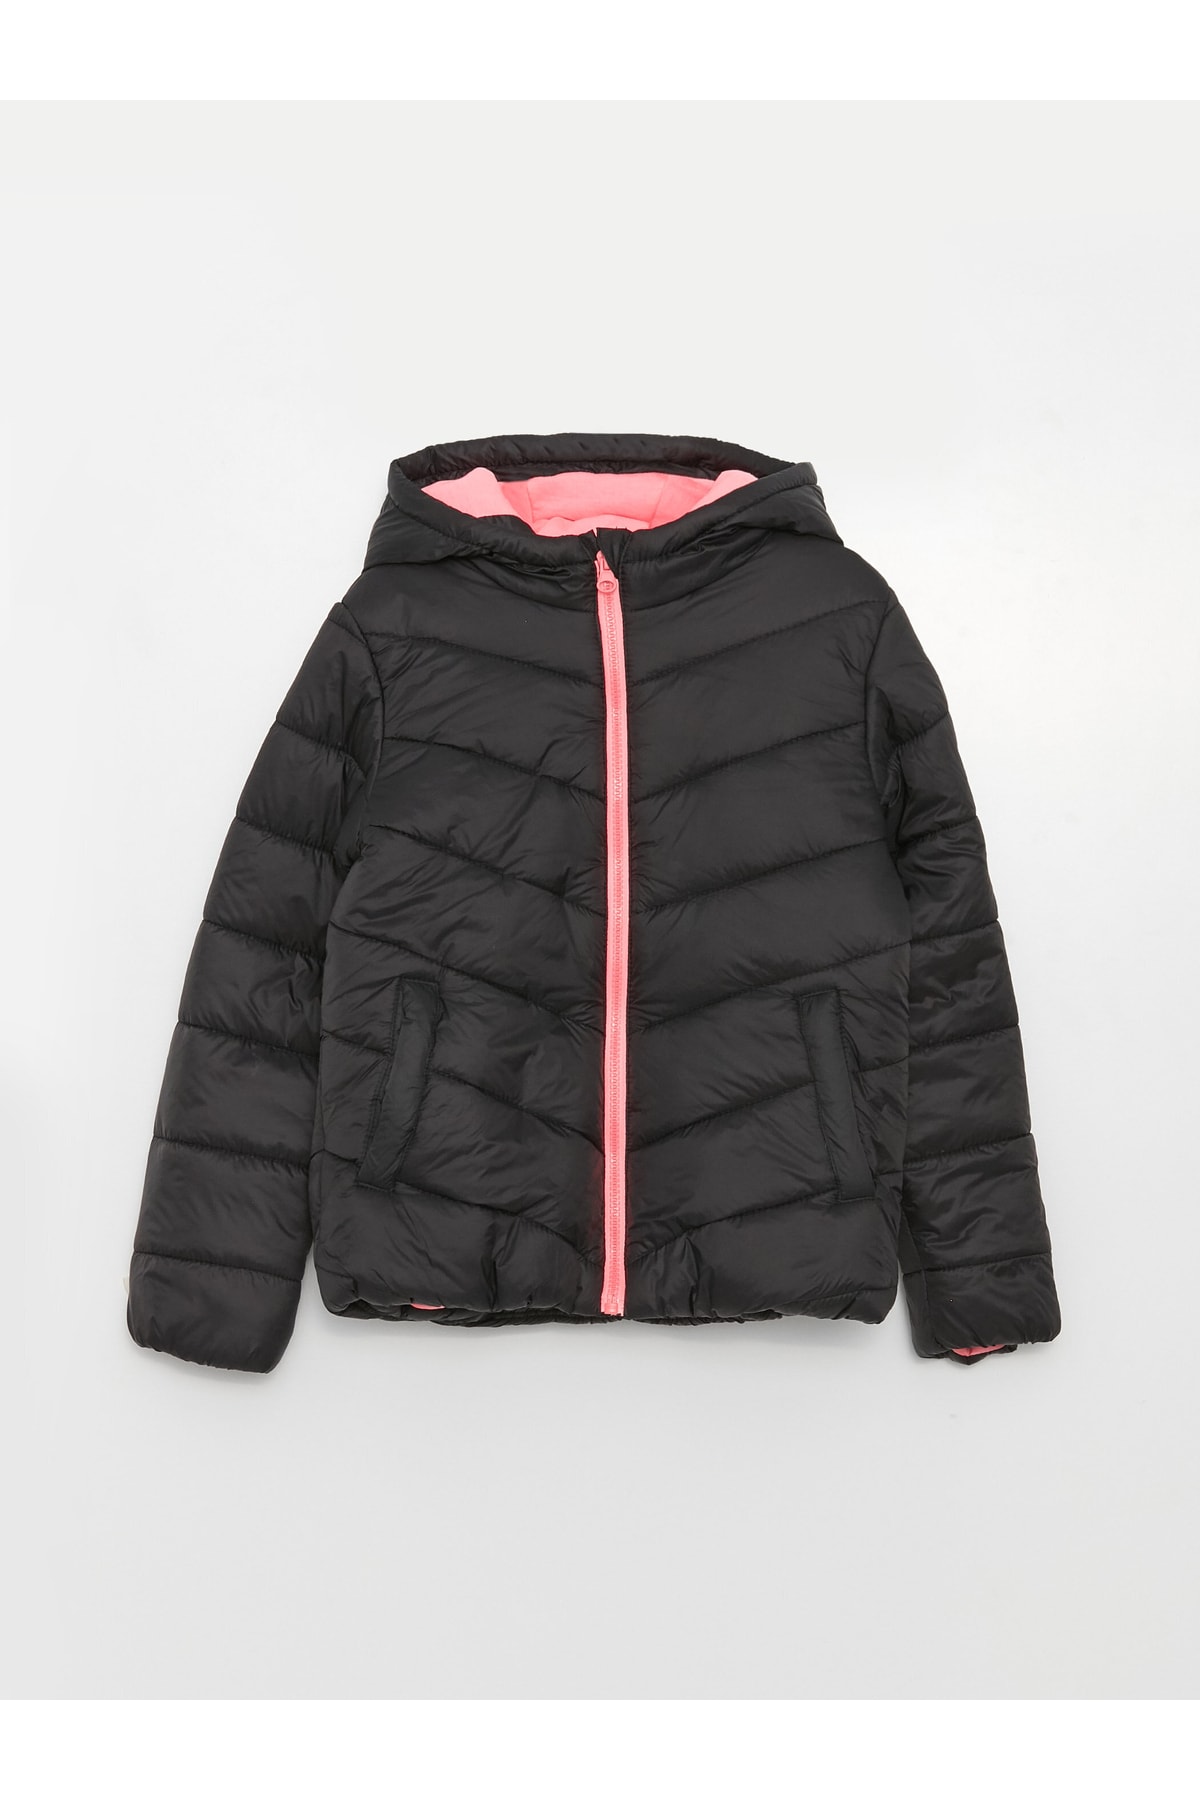 LC Waikiki Basic Girls' Down Jacket with a Hooded